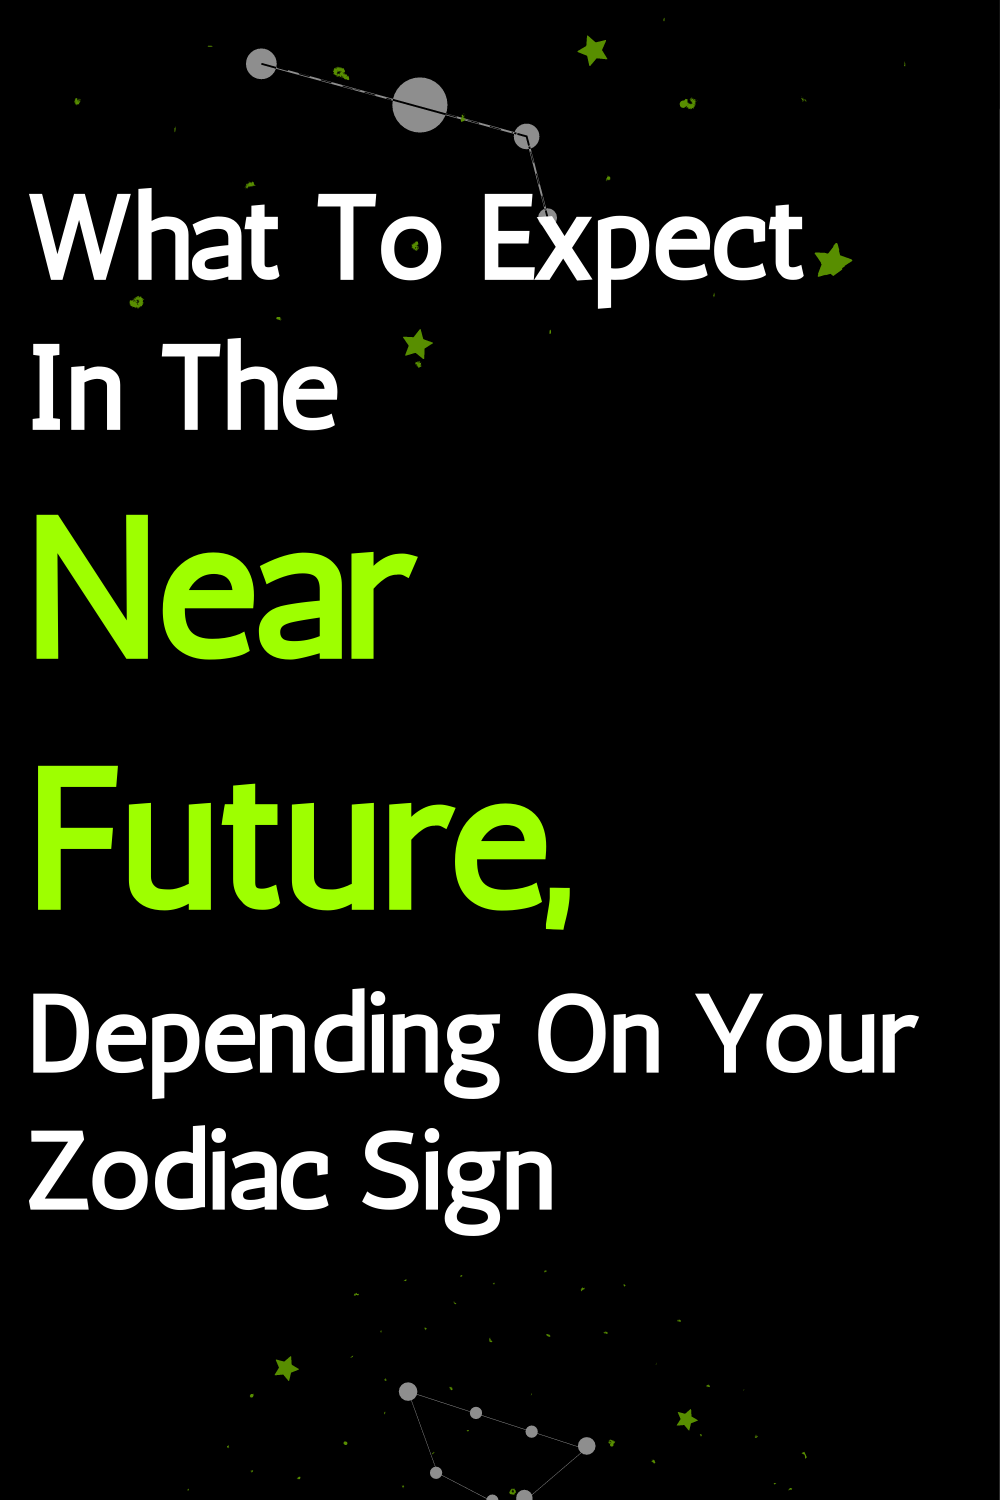 What You Need To Do To Succeed In Life, Depending On Your Zodiac Sign